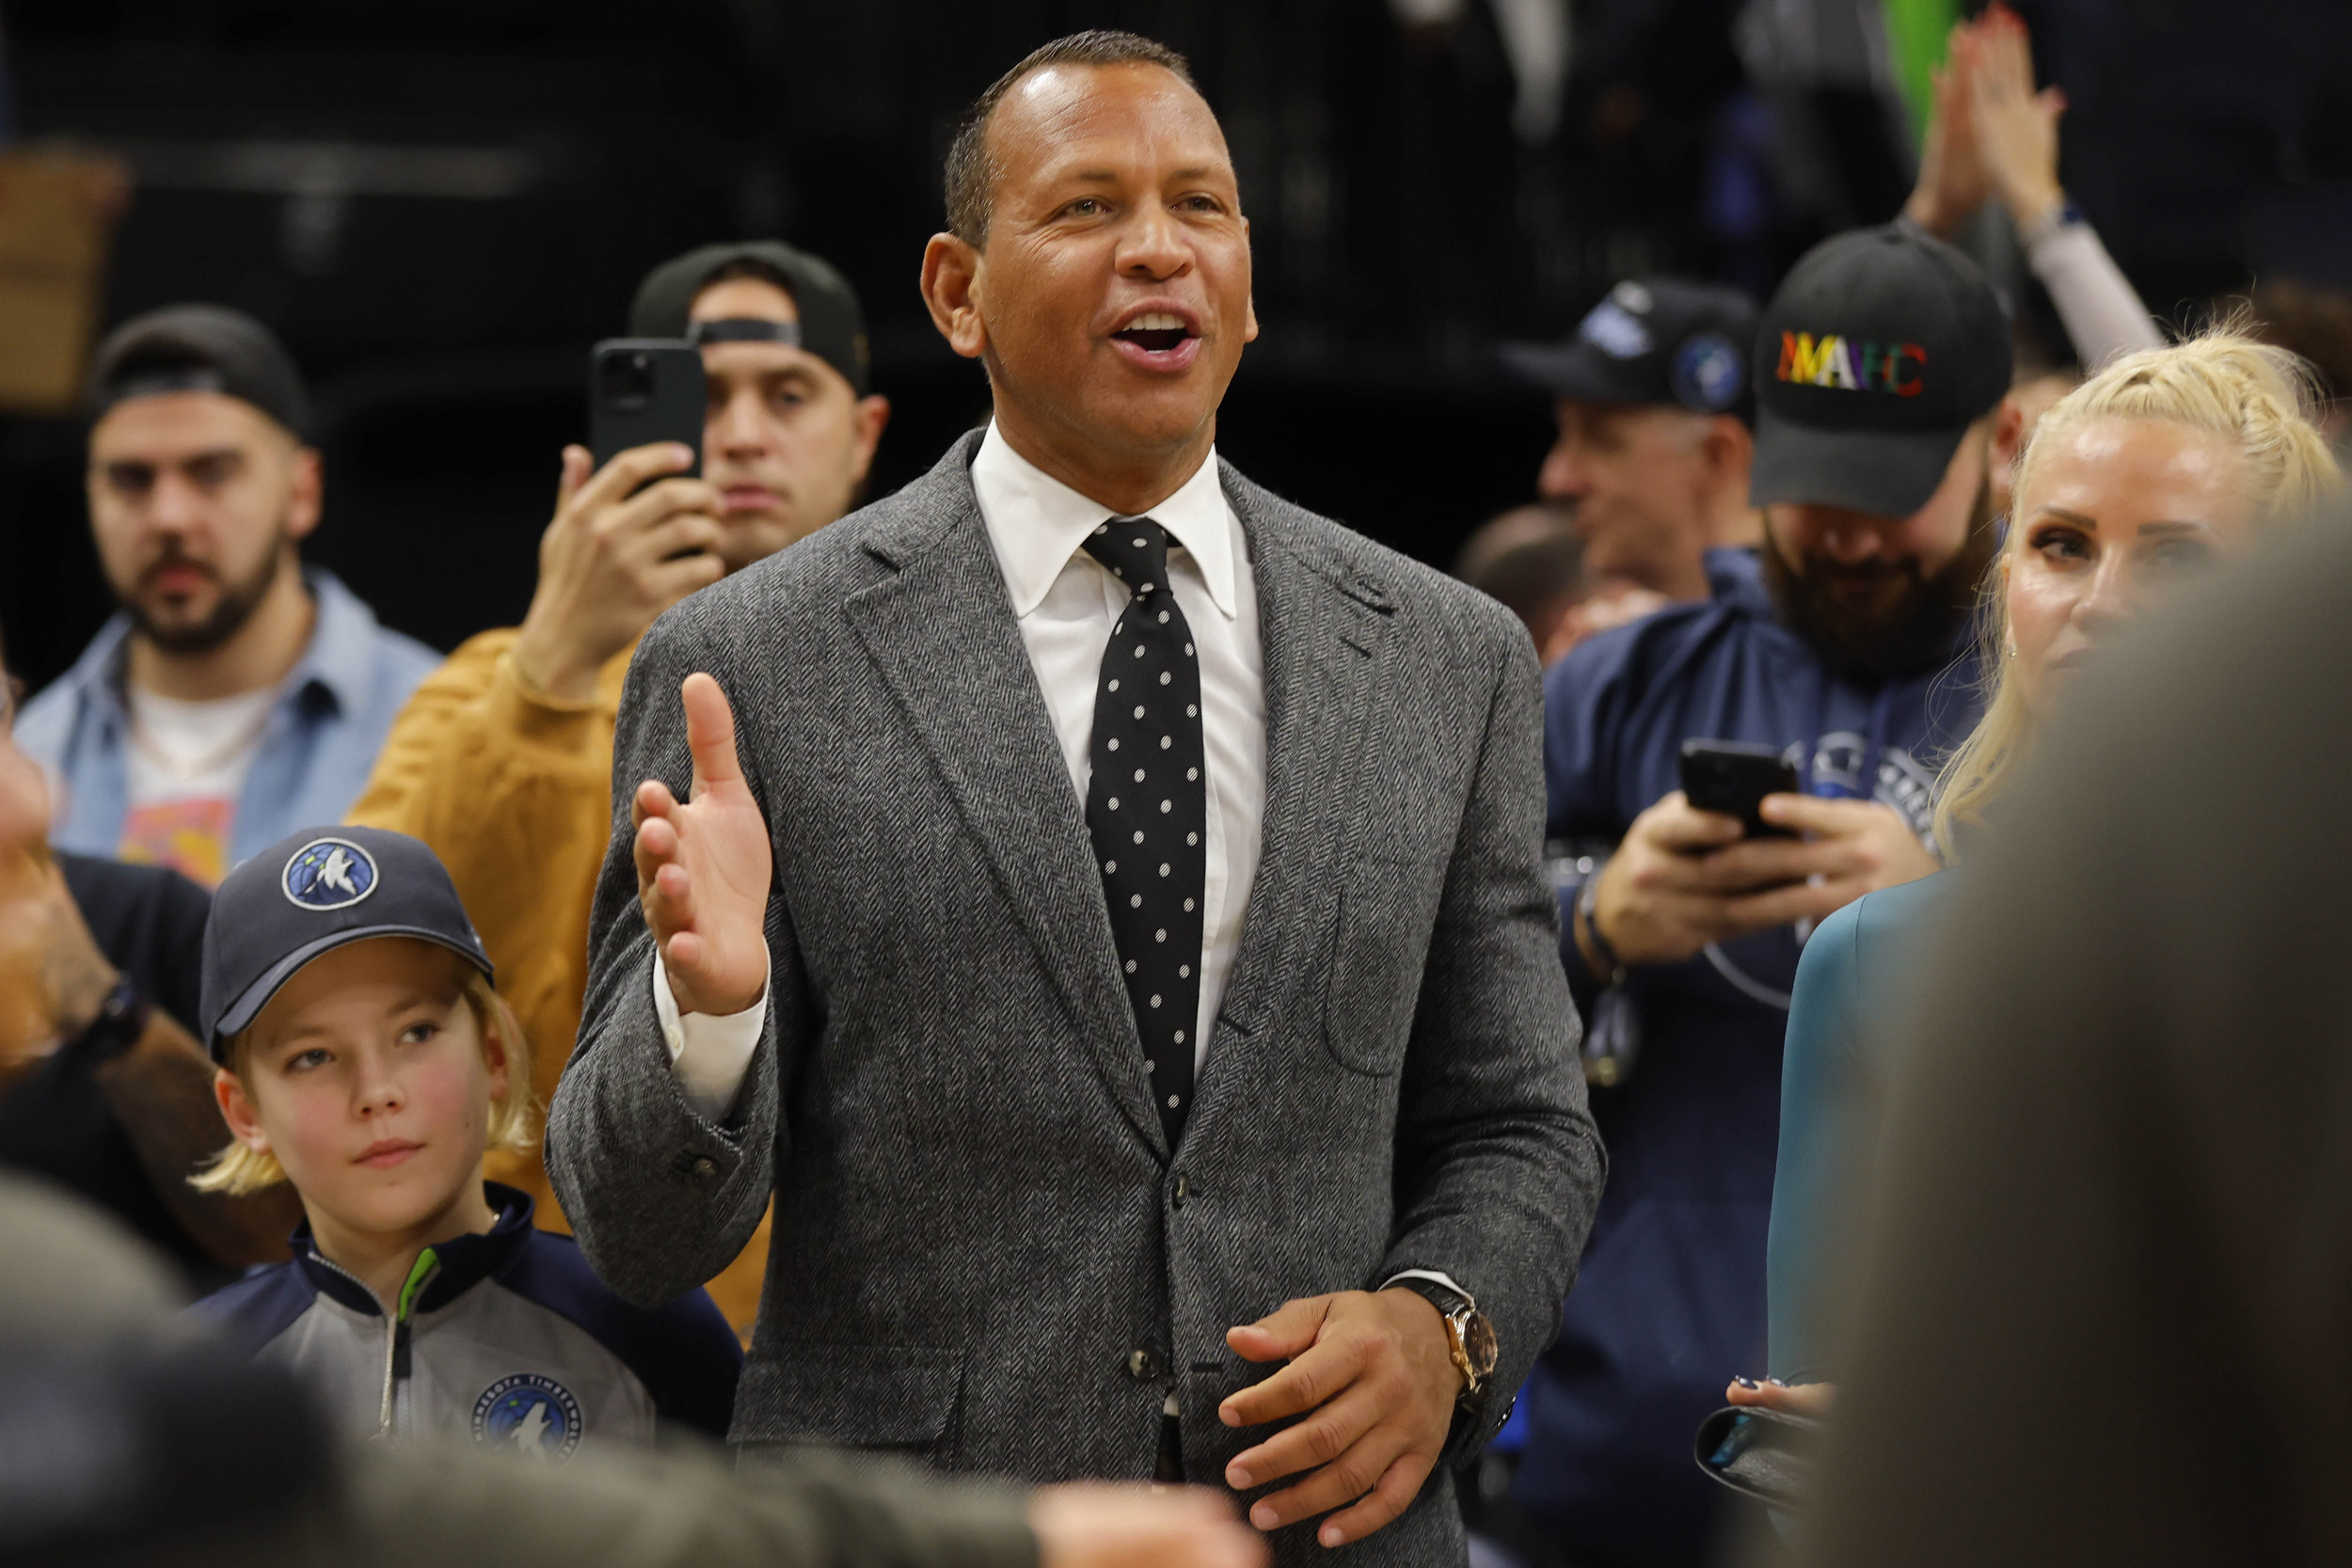 timberwolves playoffs vibes take a hit with a-rod assuming control